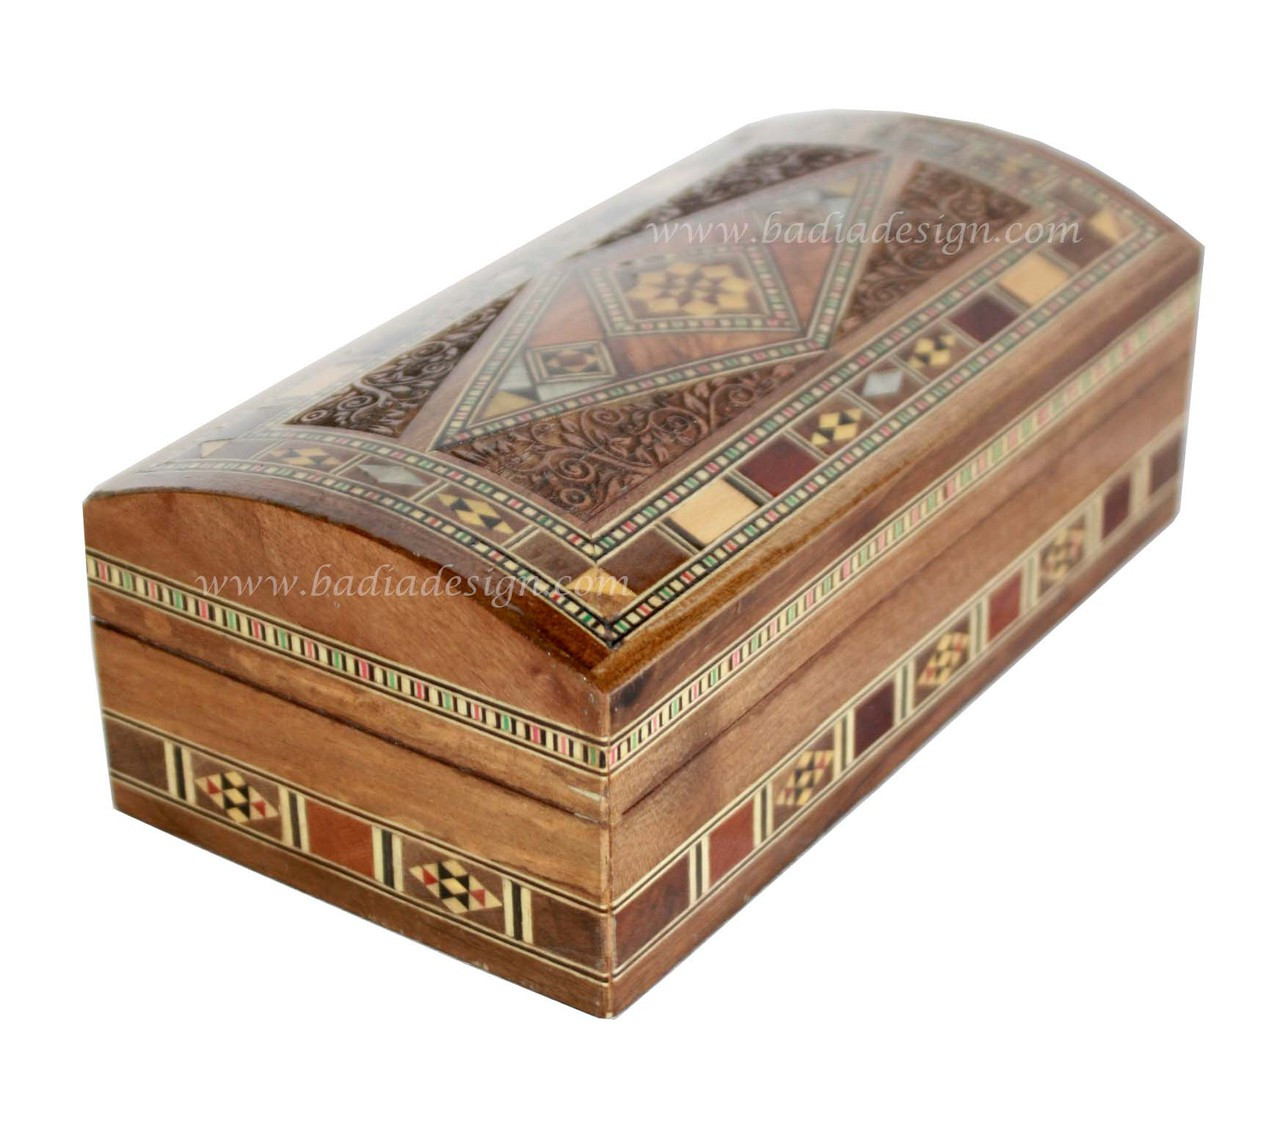 Hand Carved Wooden Inlaid Jewelry Boxes - HD168